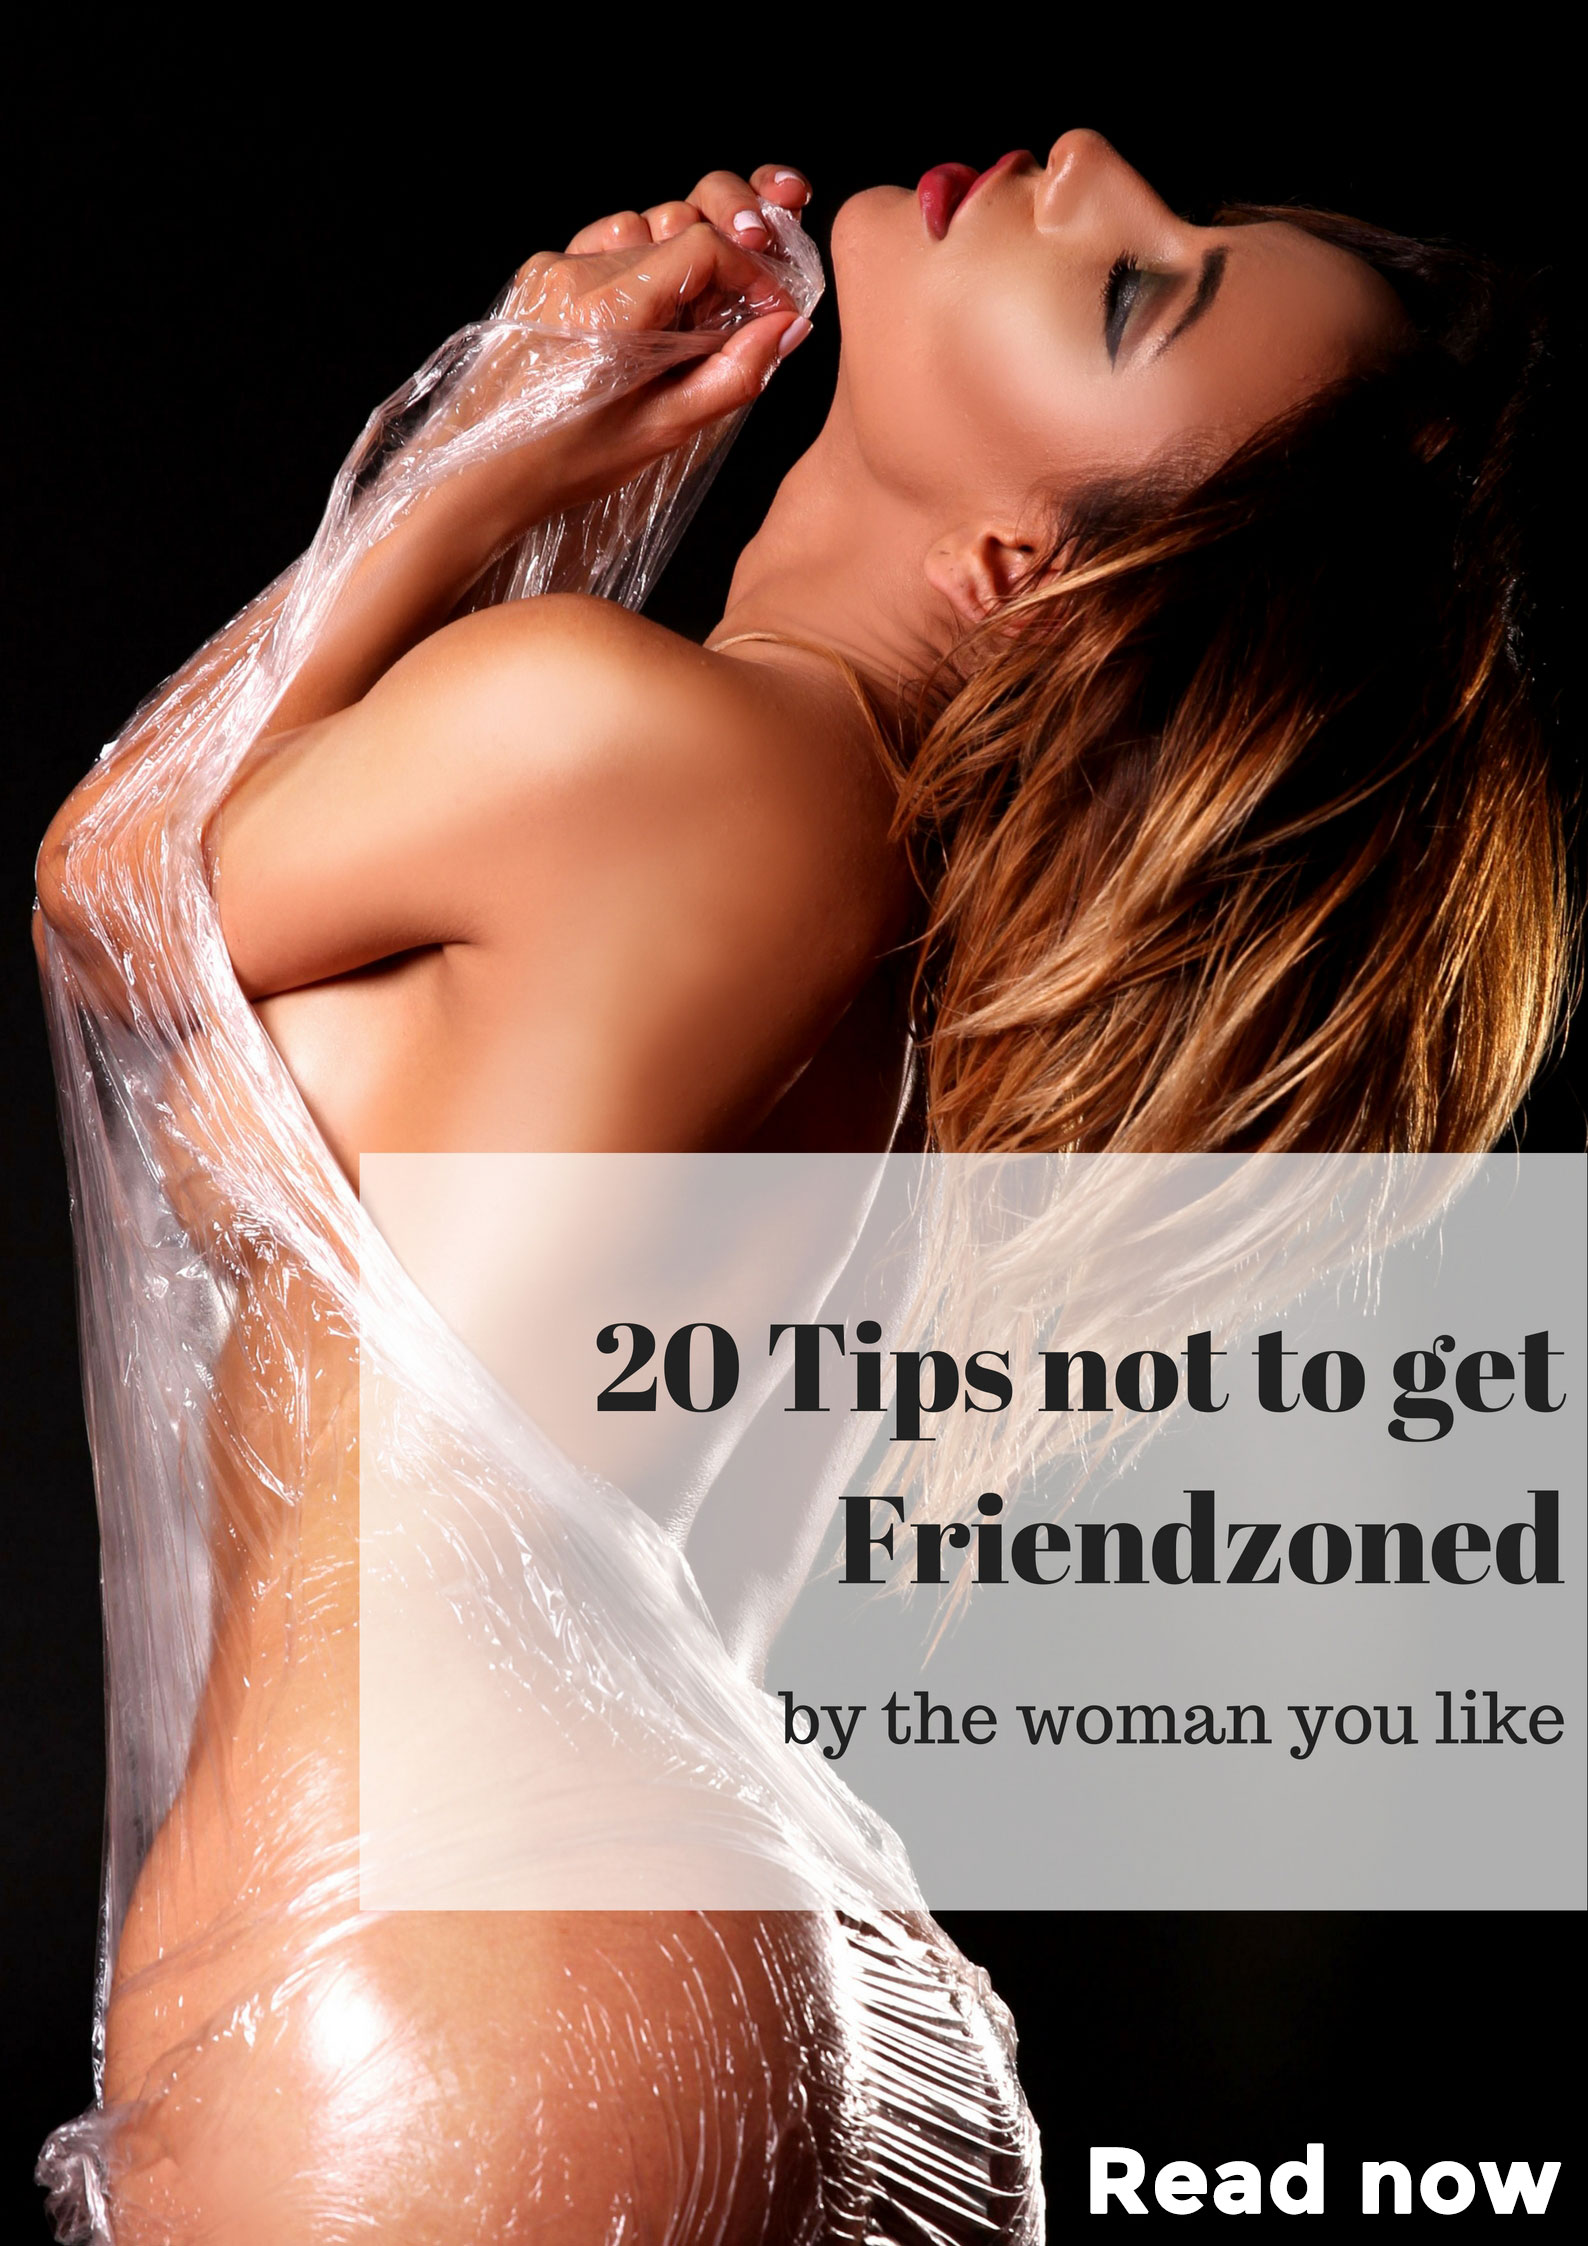 20 tips not to get friendzoned